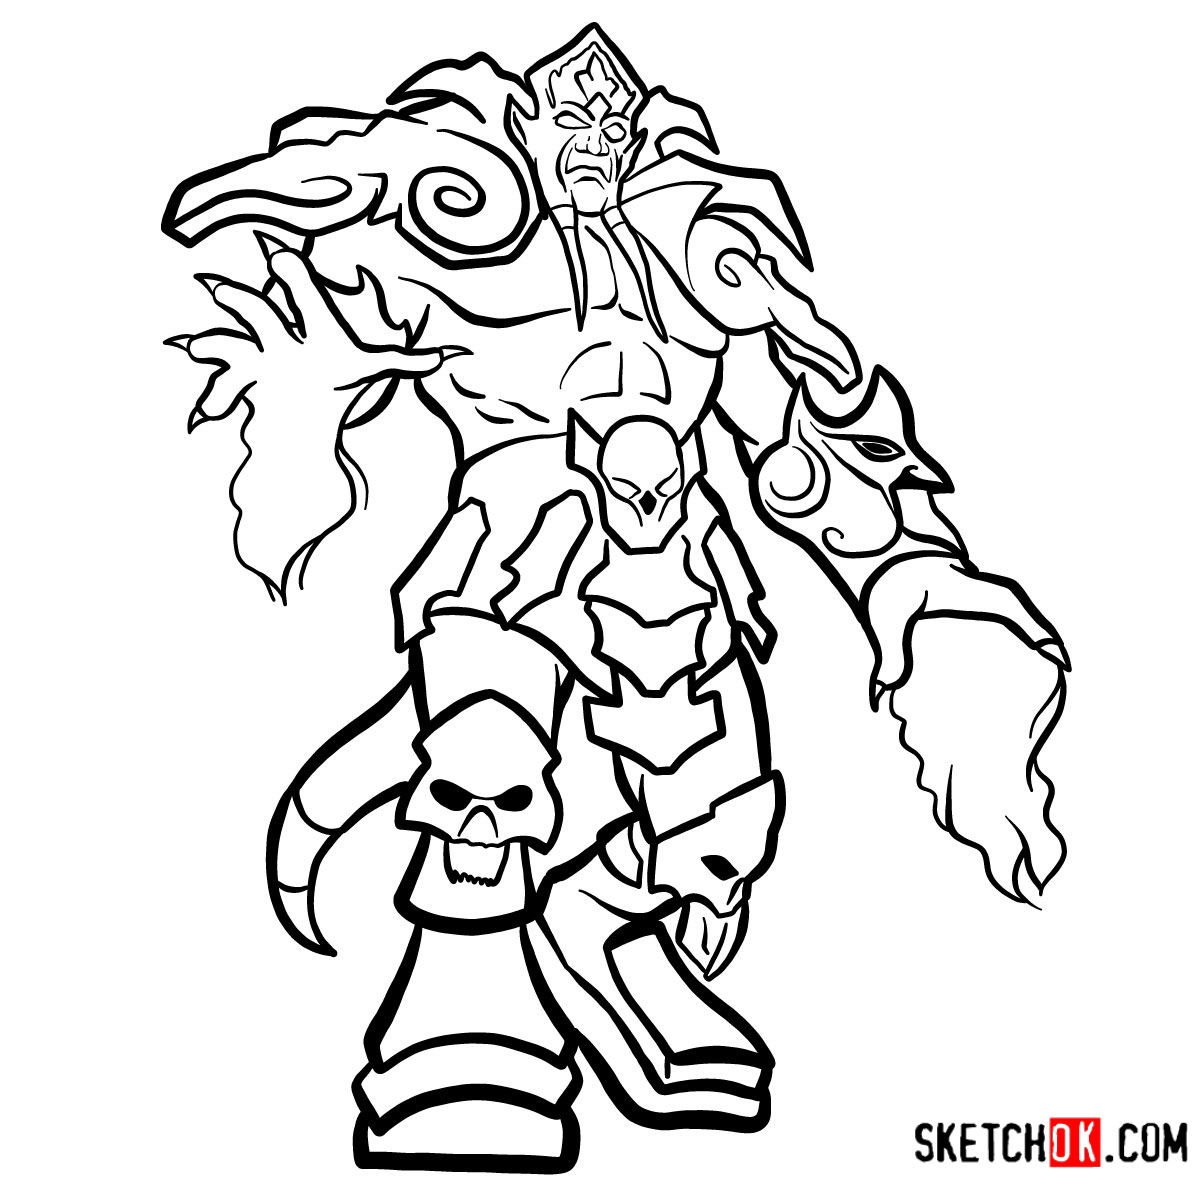 How to draw Archimonde World of Warcraft Sketchok easy drawing guides